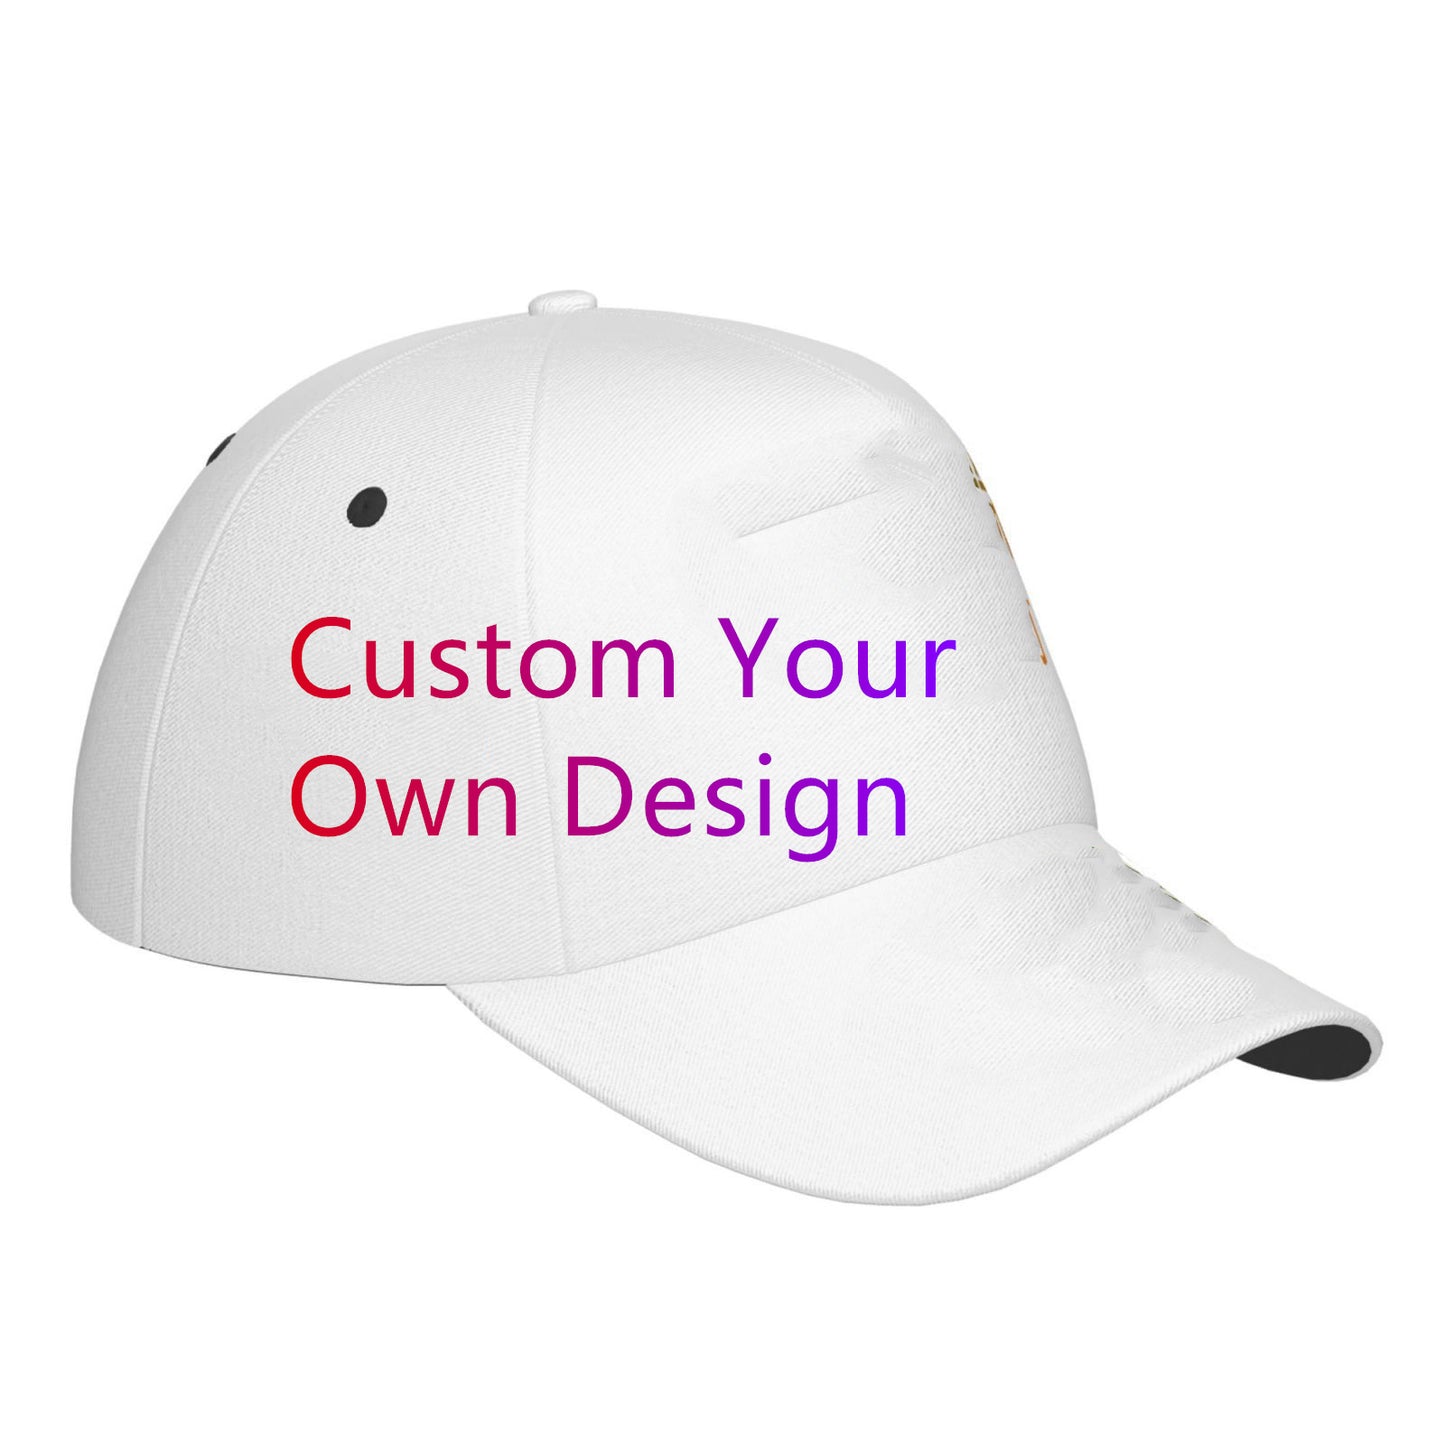 Full customize team caps with your own logo and design.